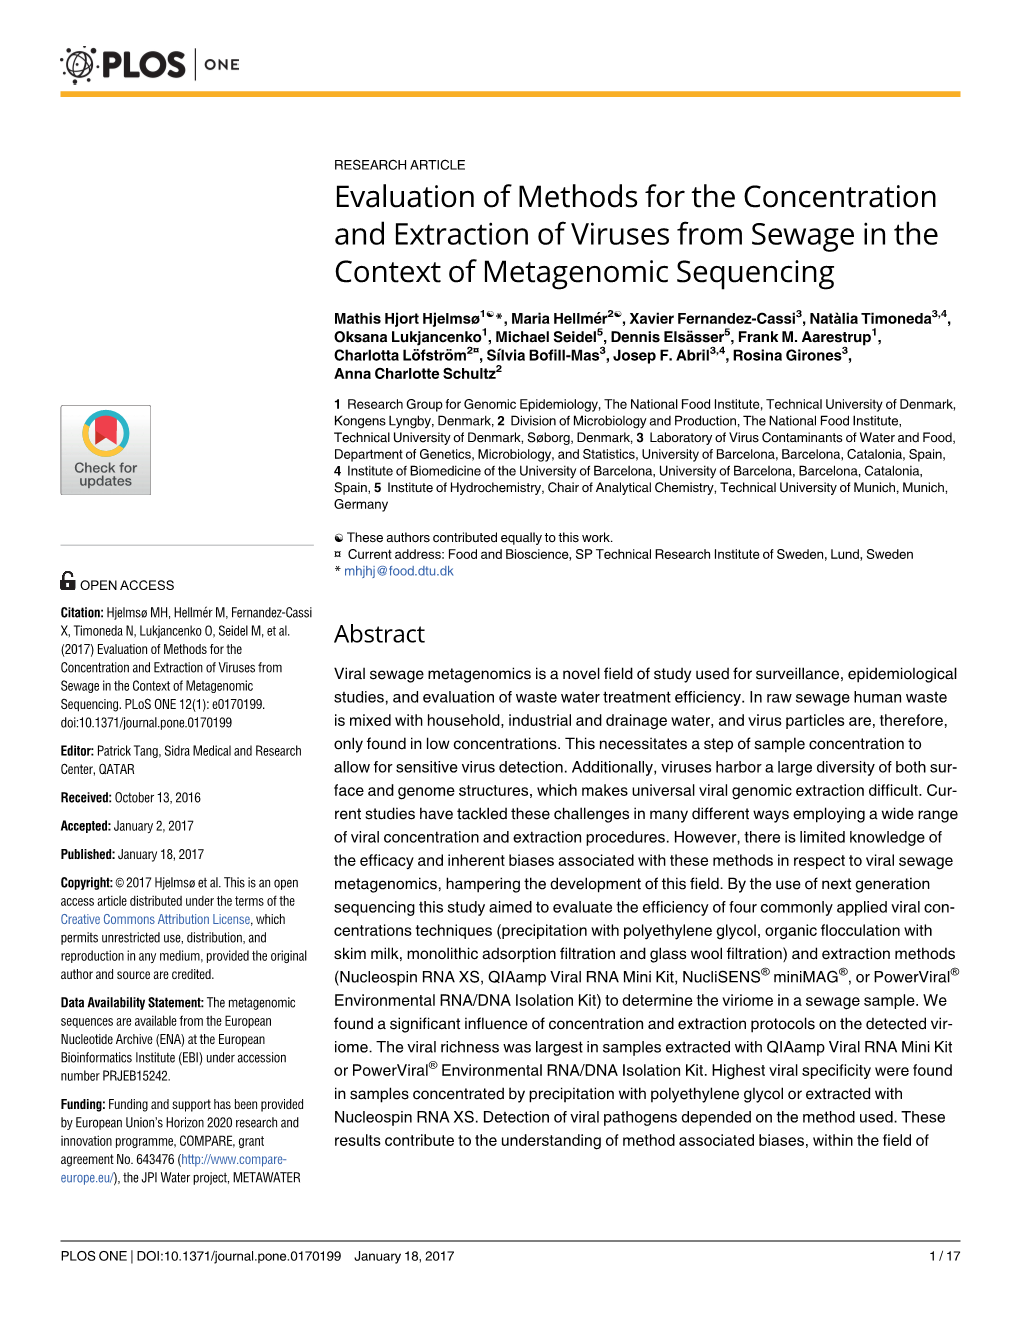 Evaluation of Methods for the Concentration and Extraction of Viruses from Sewage in the Context of Metagenomic Sequencing